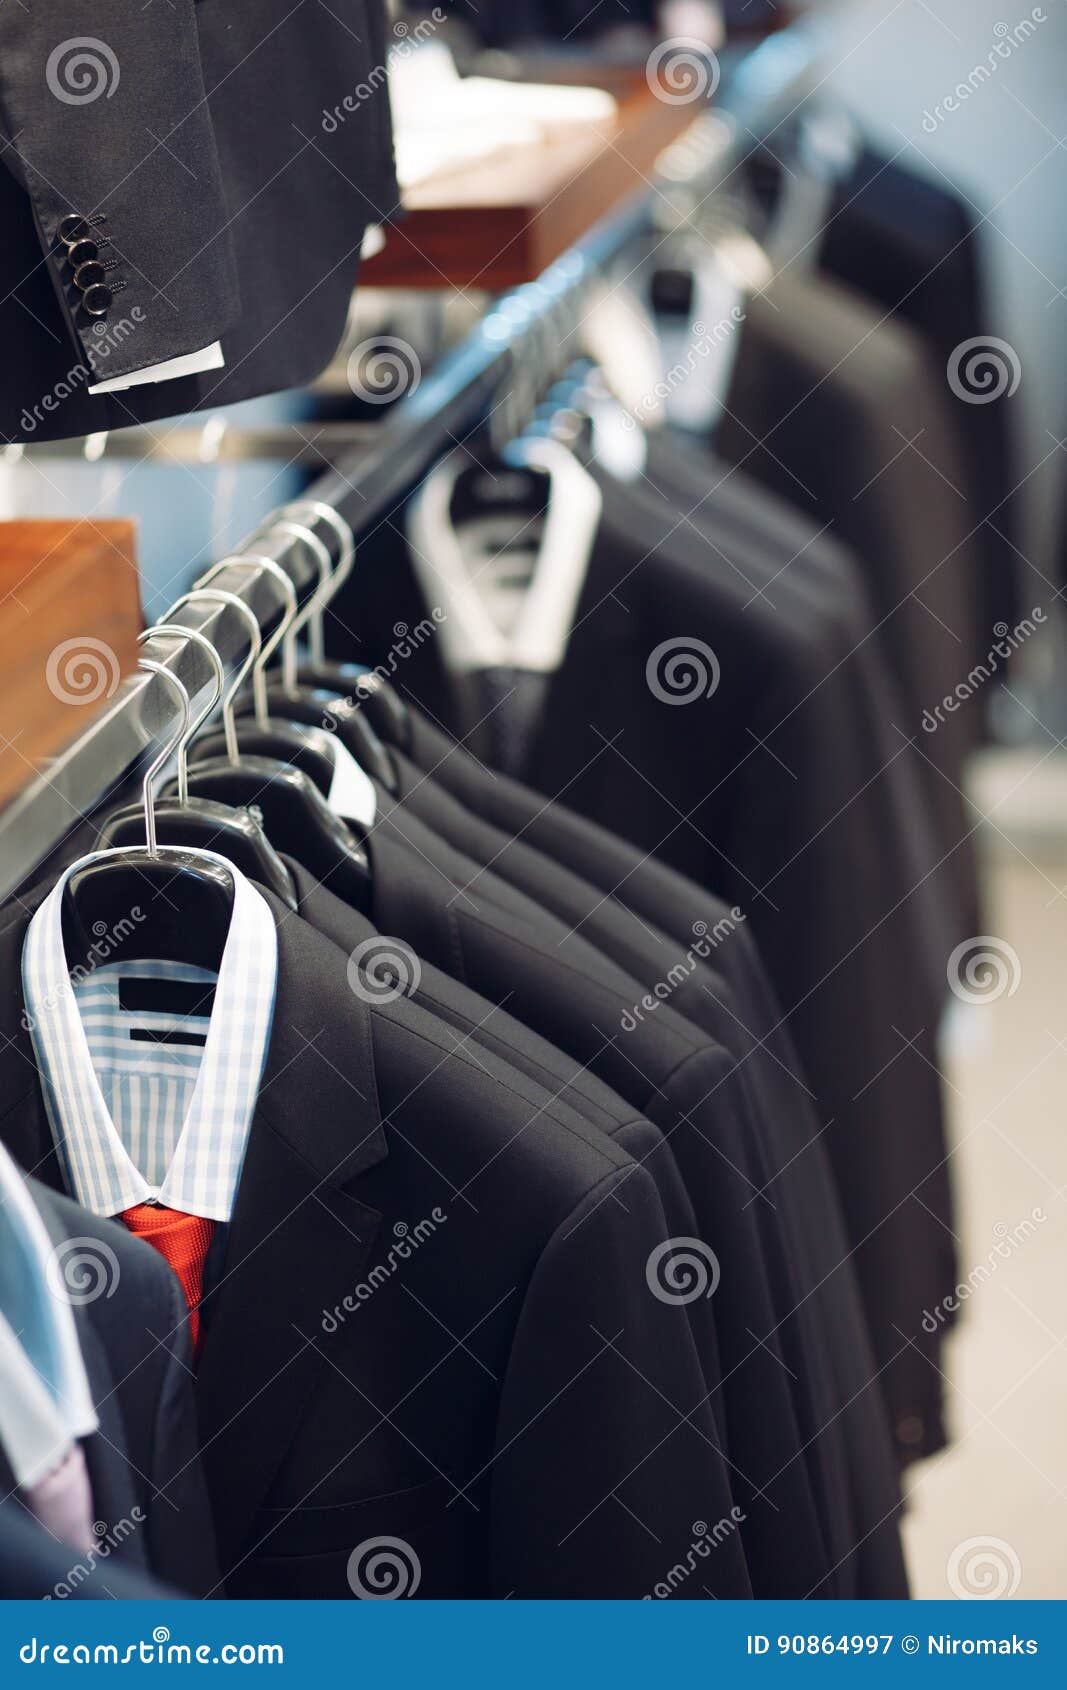 Hanger with Men`s Suits and Shirts Stock Image - Image of apparel ...